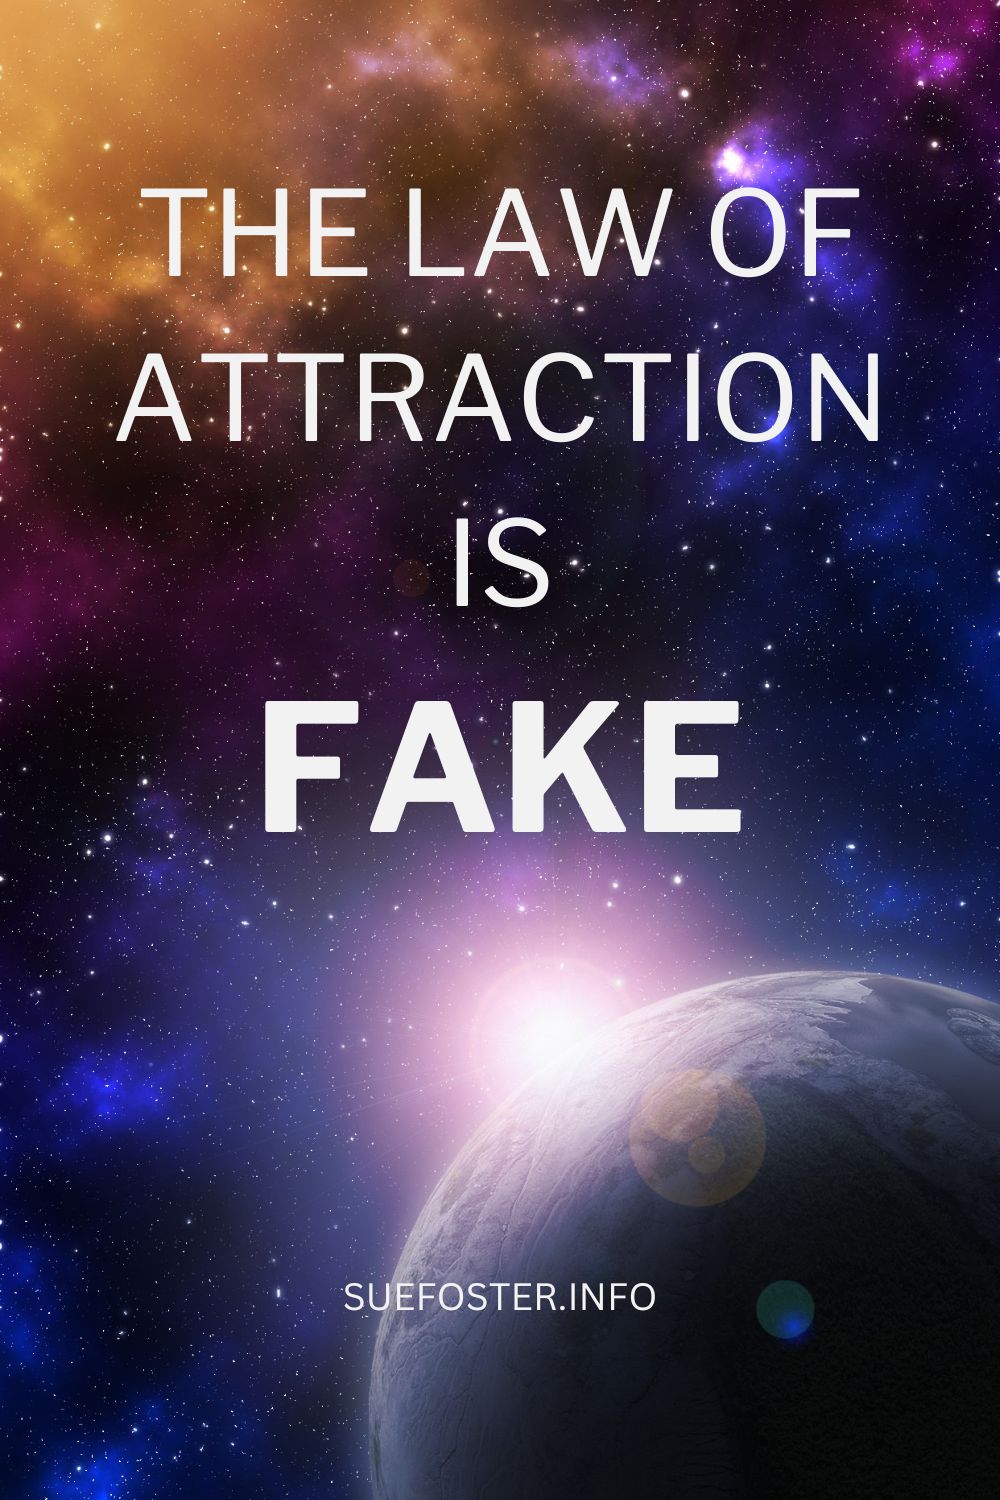 The truth behind the Law of Attraction: it's not magic, it's exploitation. Don't wait for dreams, work for them.